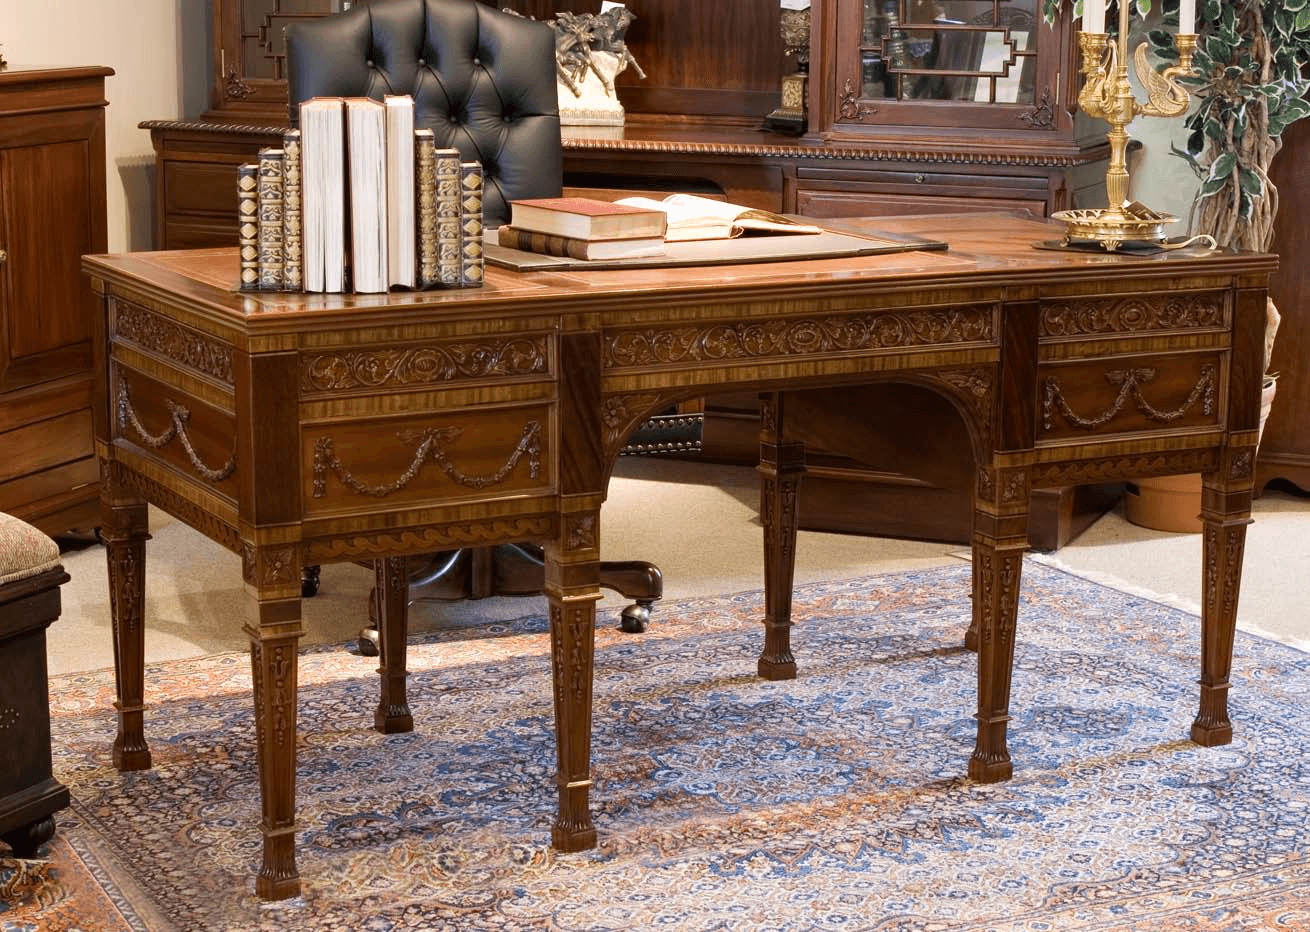 NEOCLASSIC STYLE DESK - House of Chippendale